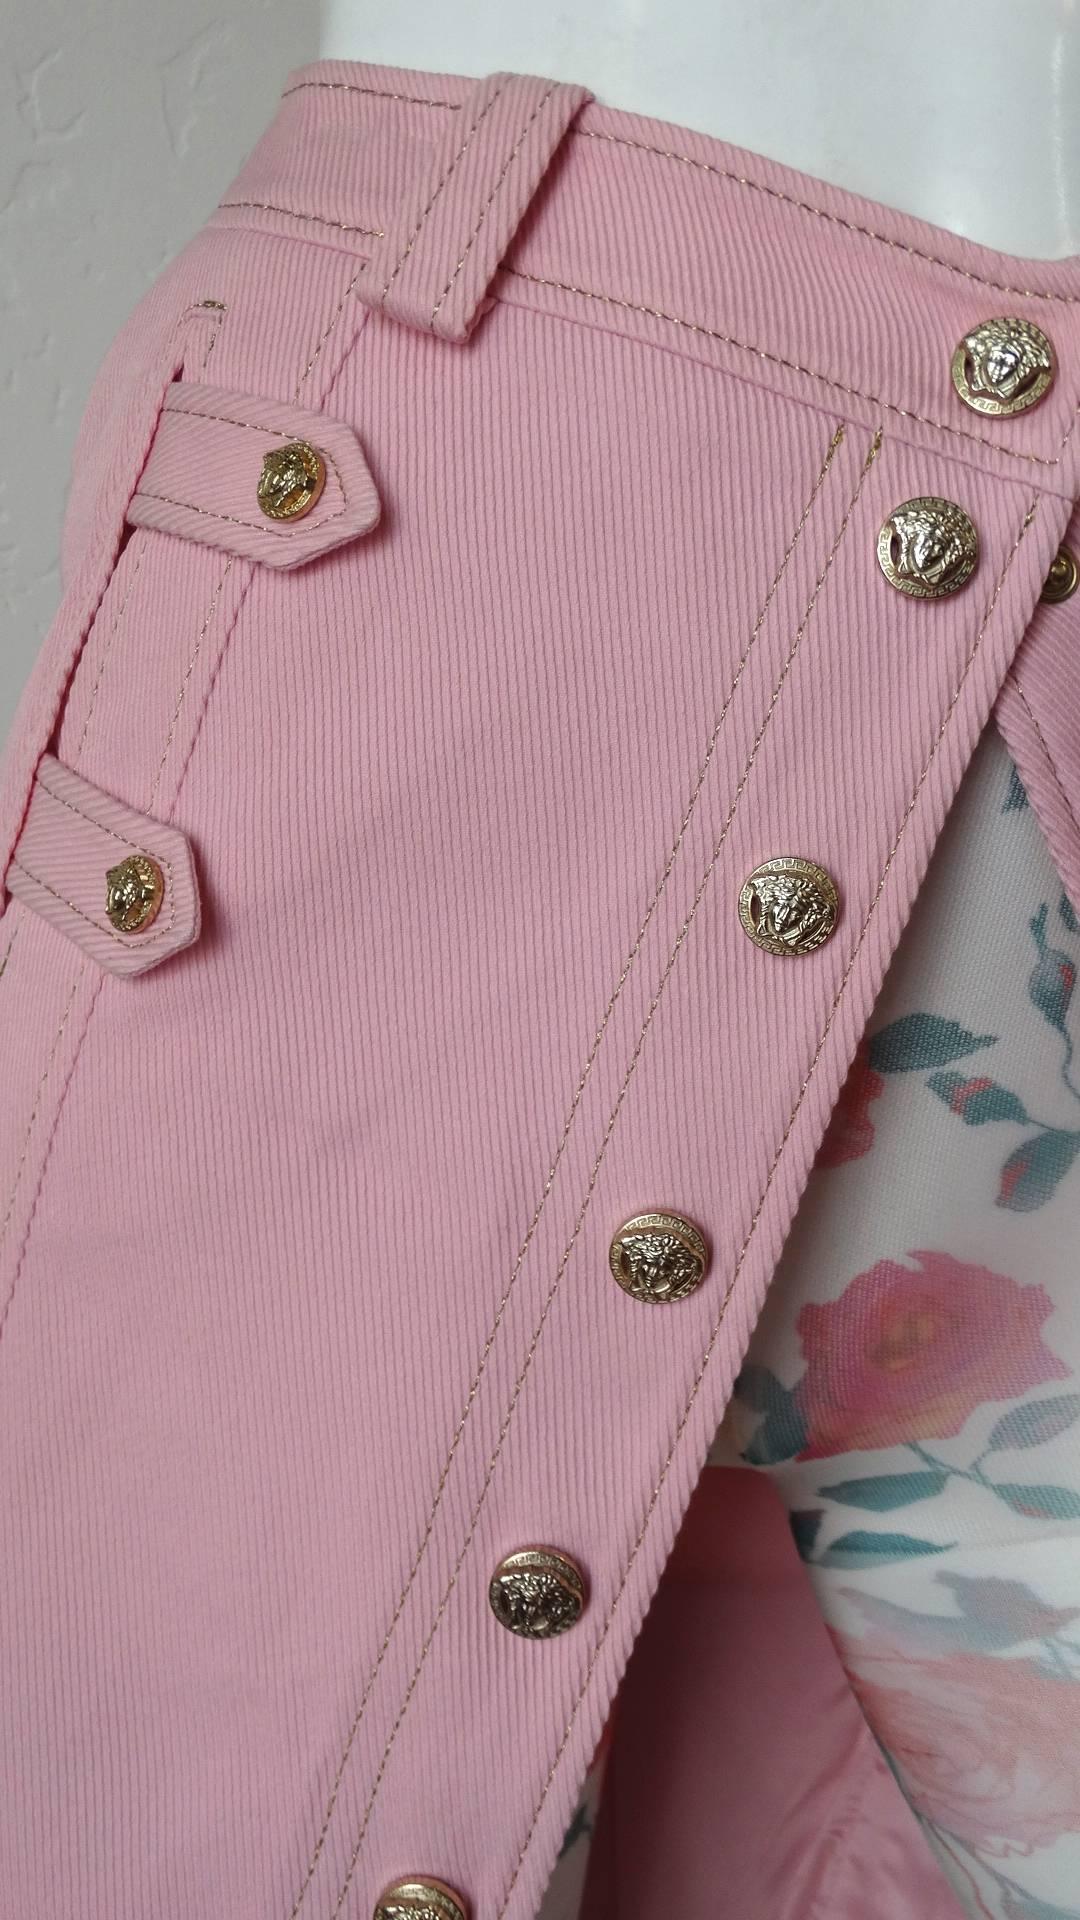 The most adorable 1990s Versace baby pink button up skirt! Made of a textured cotton fabric, made to look like denim- in a shade of soft pink. Accented with gold medusa head embossed buttons up the front of the skirt. Detailed denim inspired